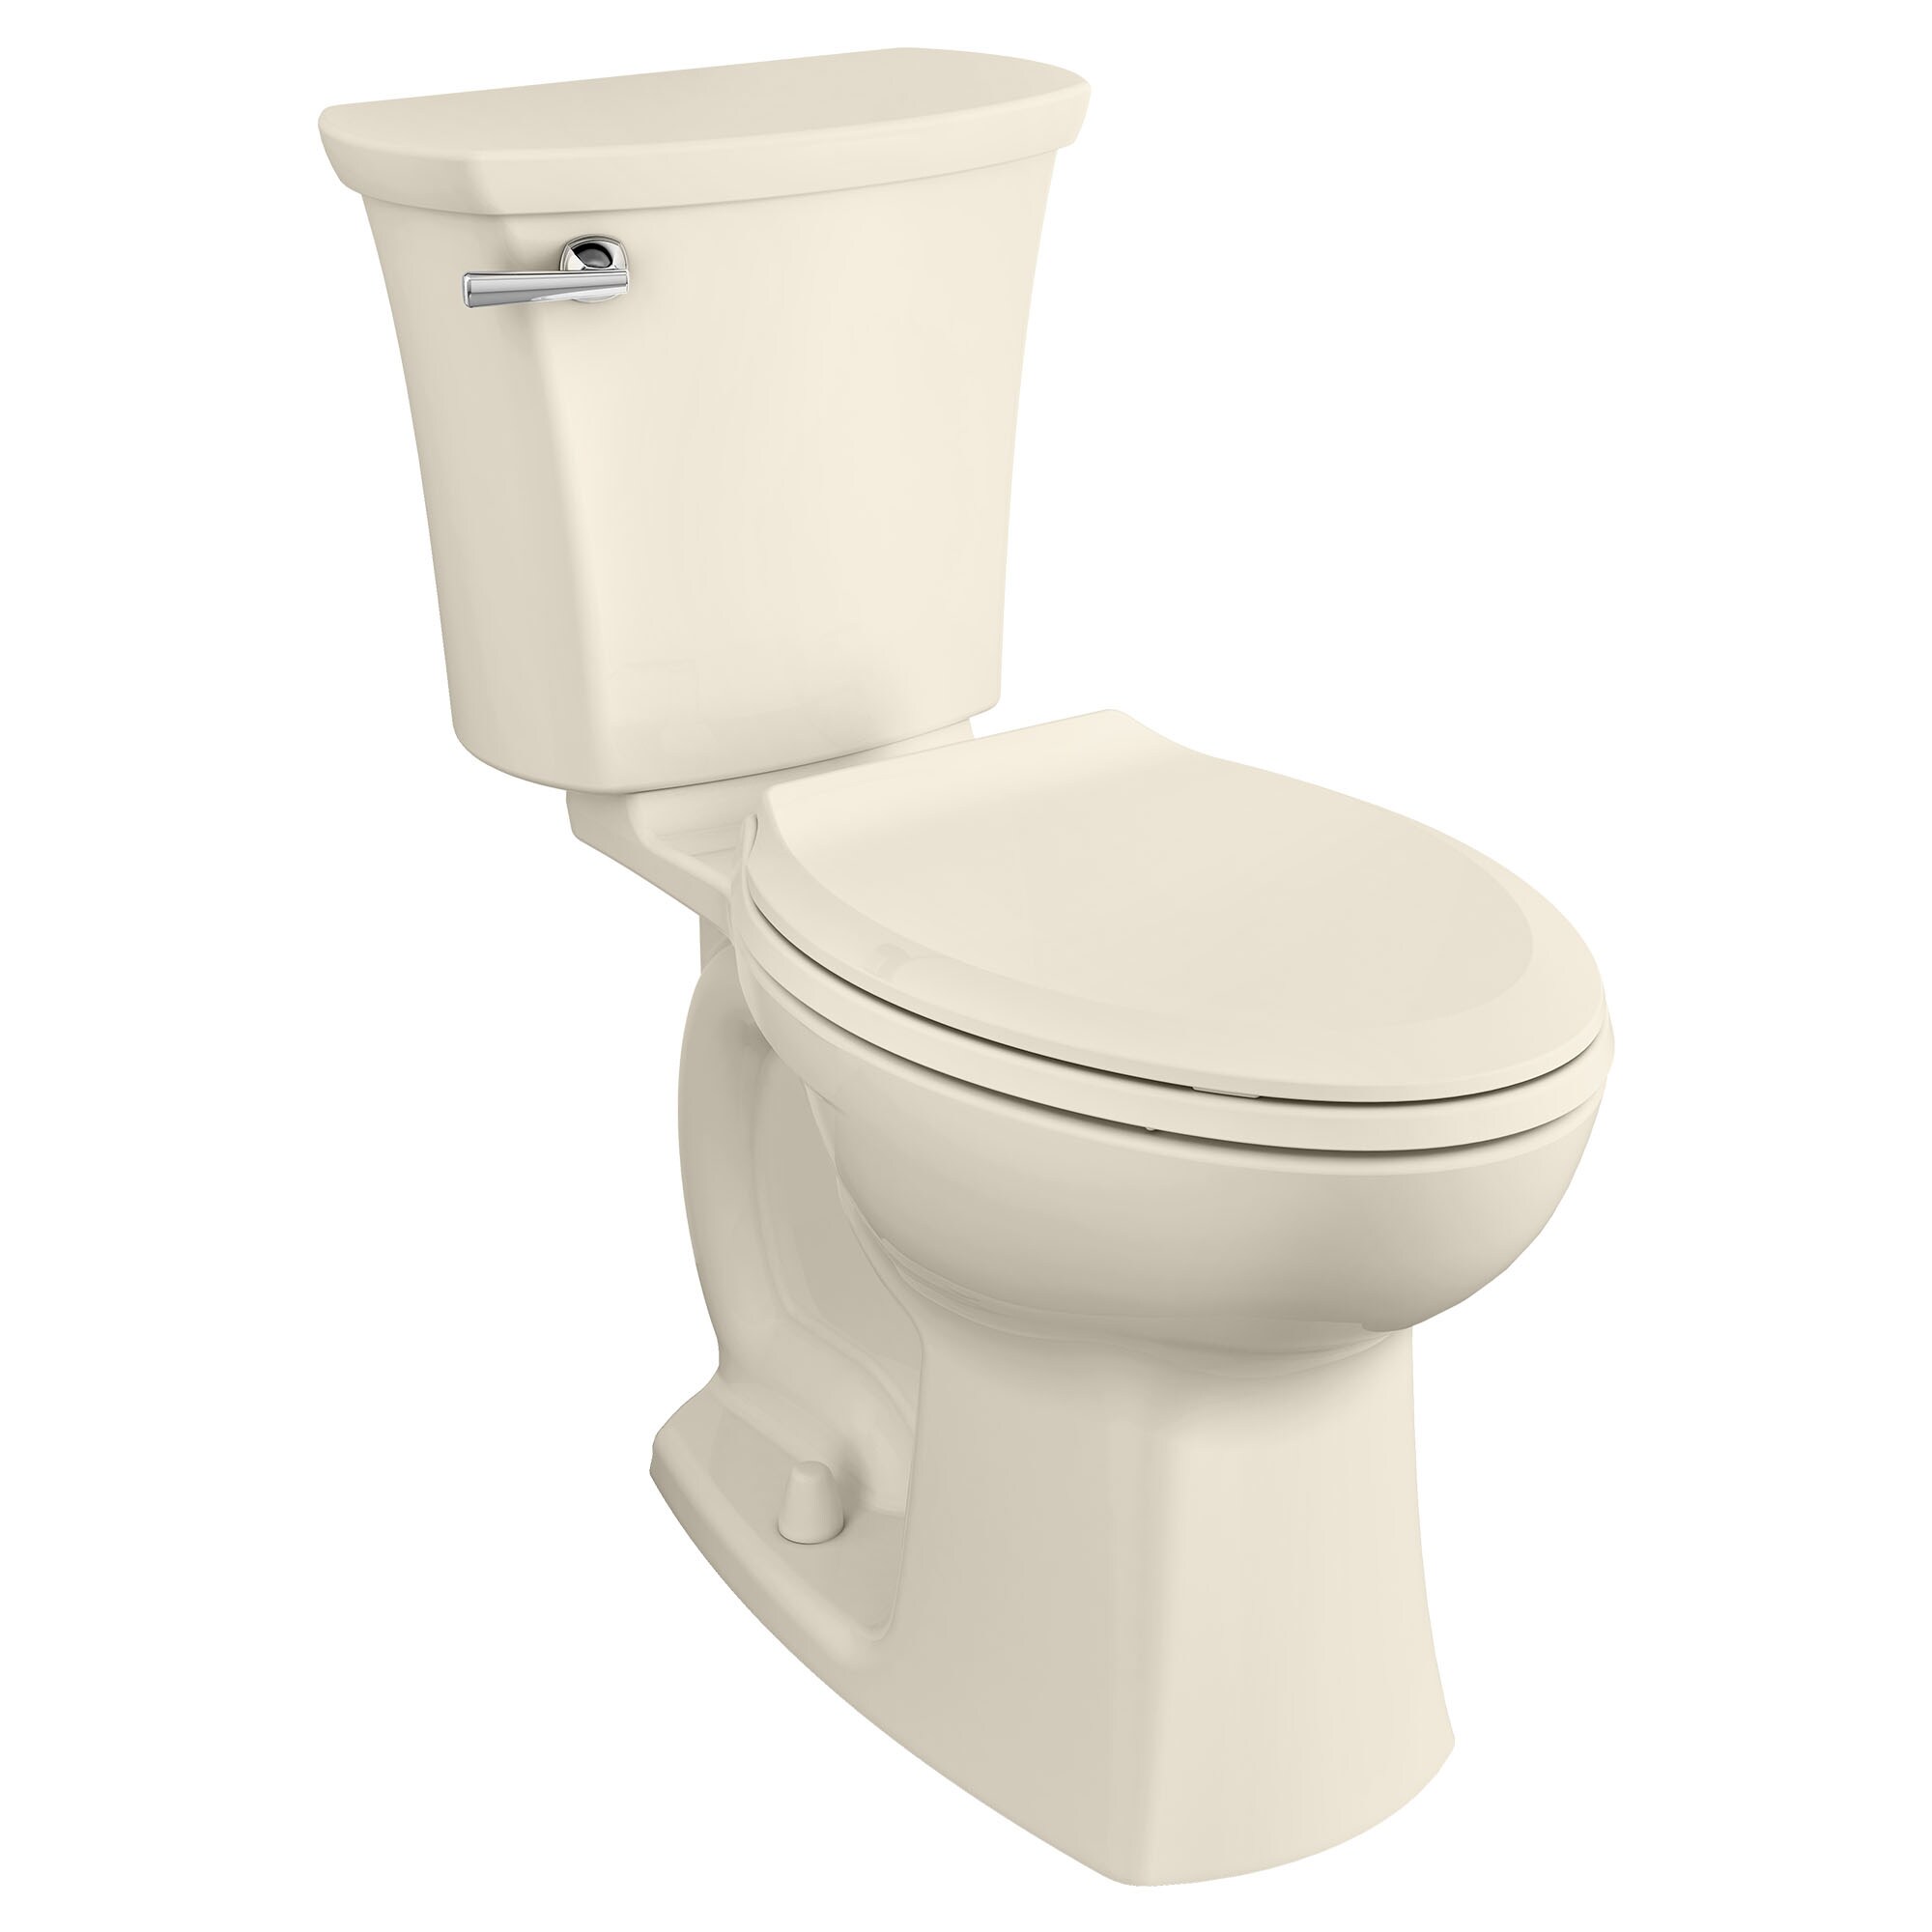 New Glacier Bay Elongated Toilet Seat Cover Bone or Biscuit 